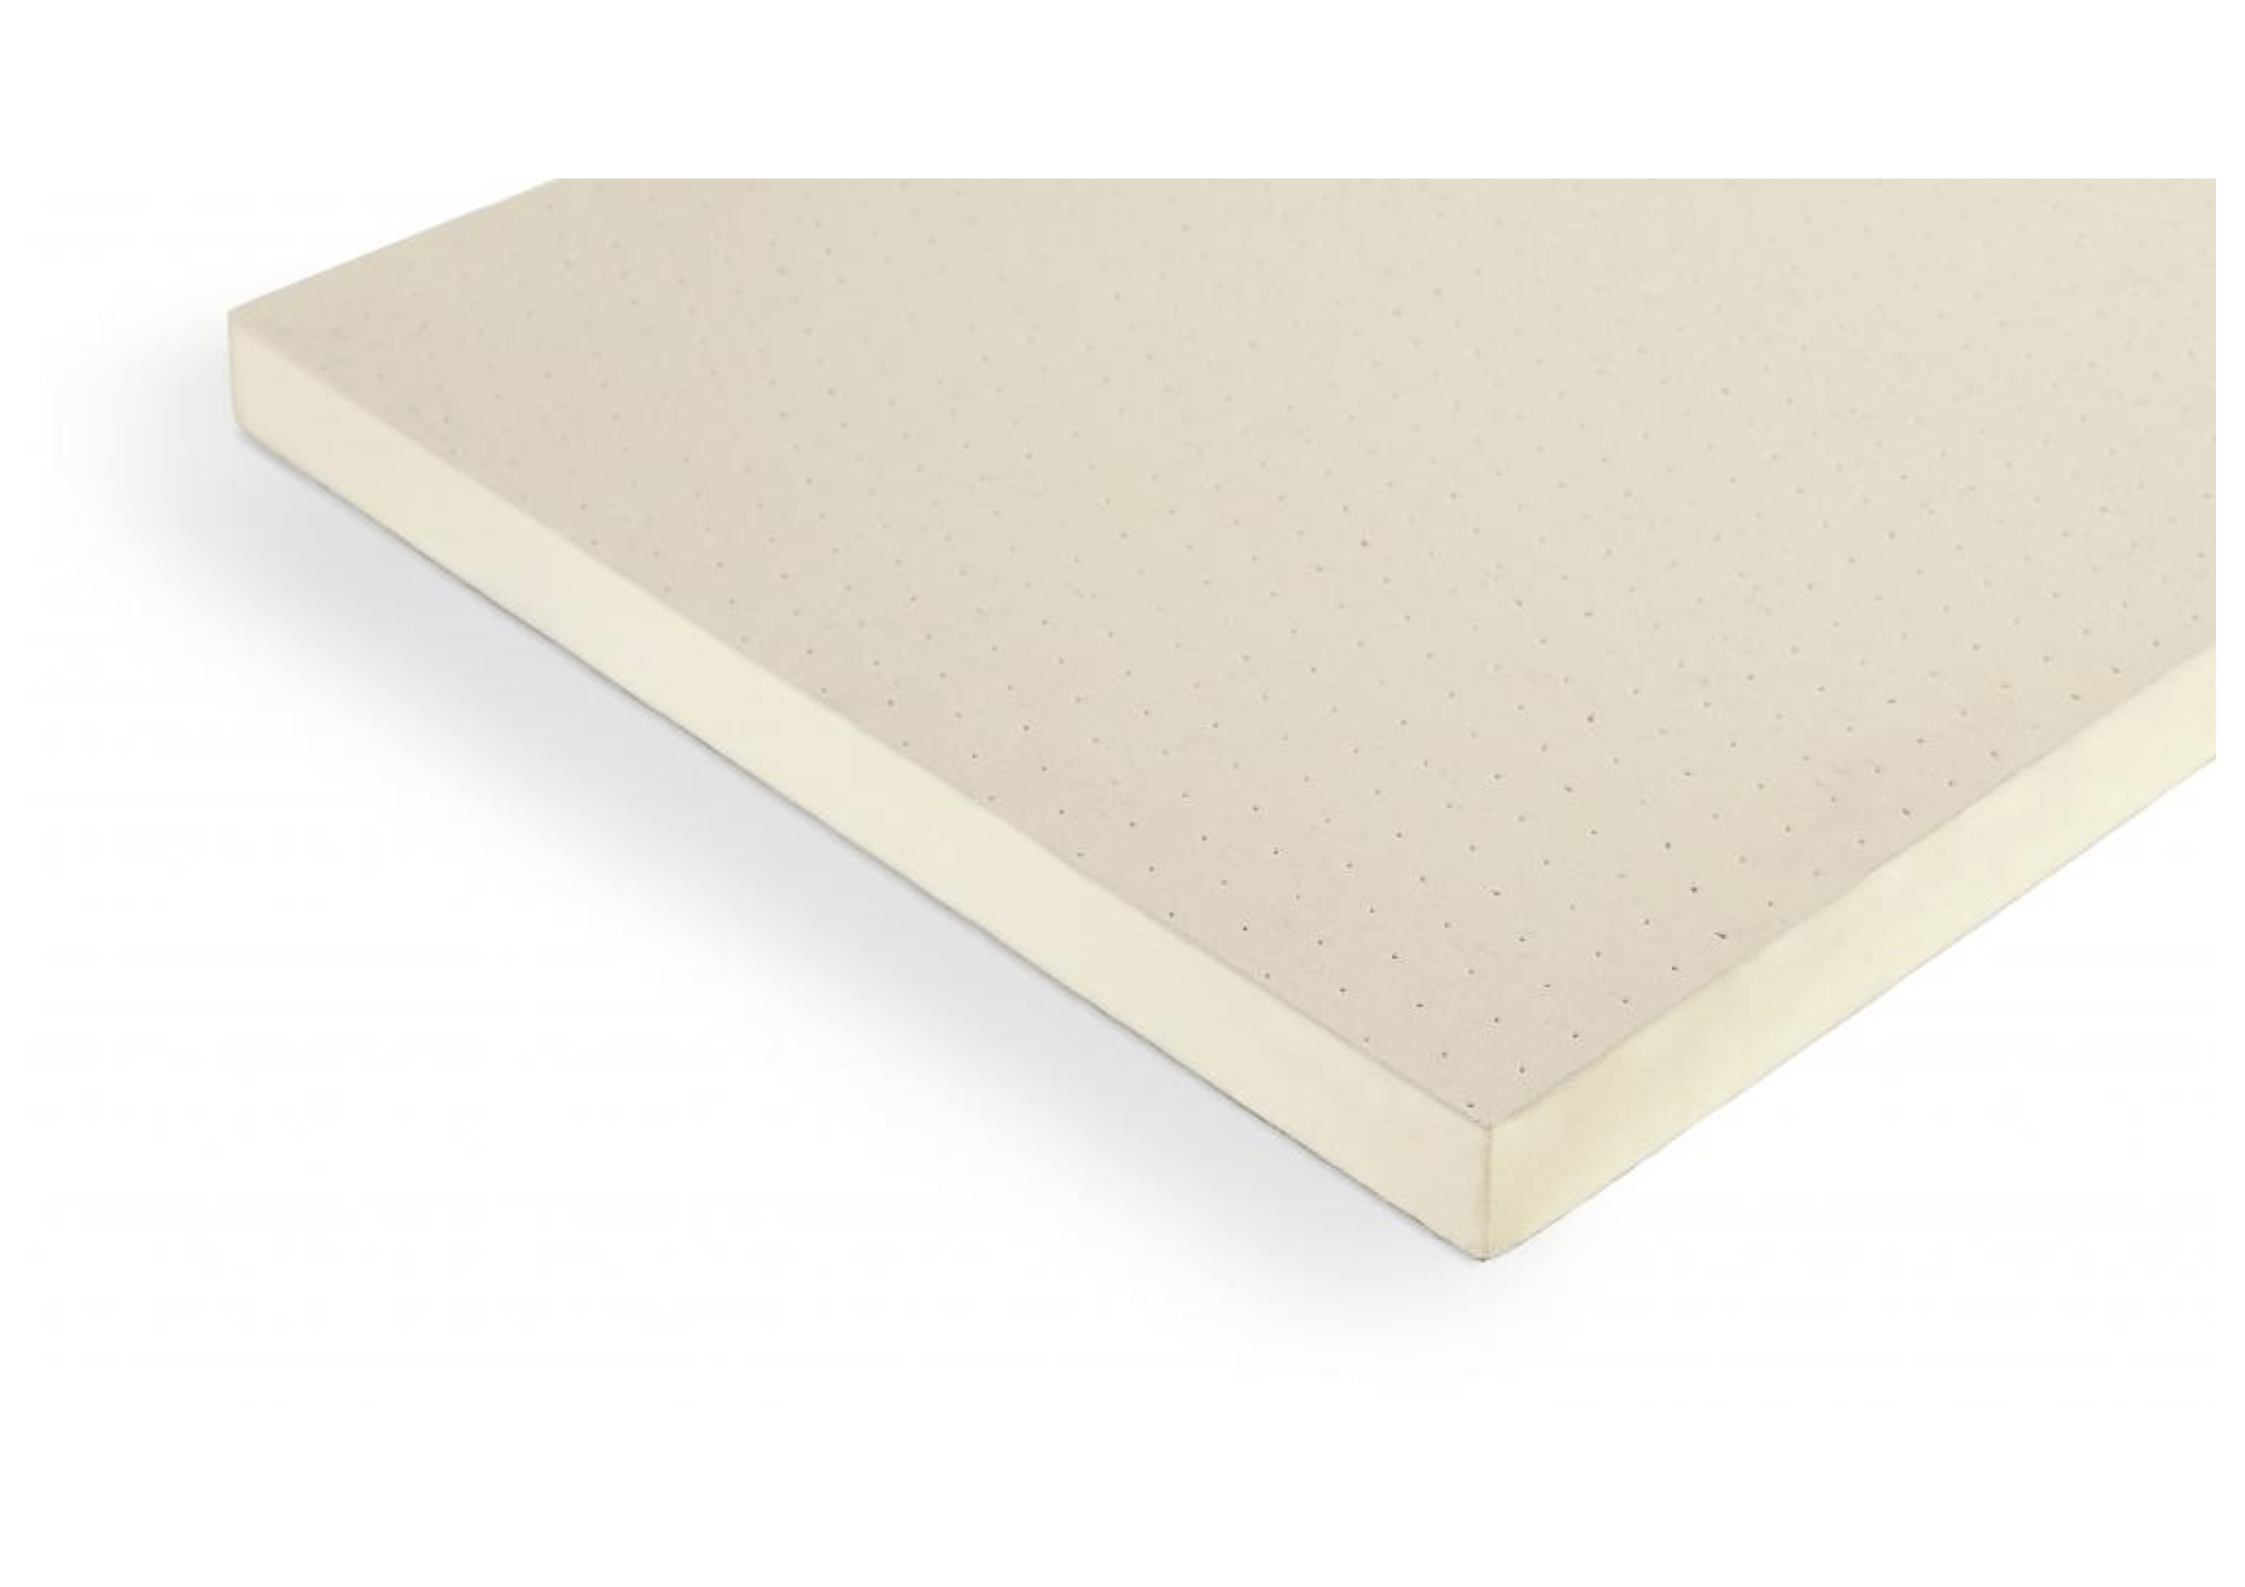 Recticel Insulation 50mm (pack of 10) Recticel Powerdeck F Flat Roof Insulation Board | 1200 x 600mm IUK01781